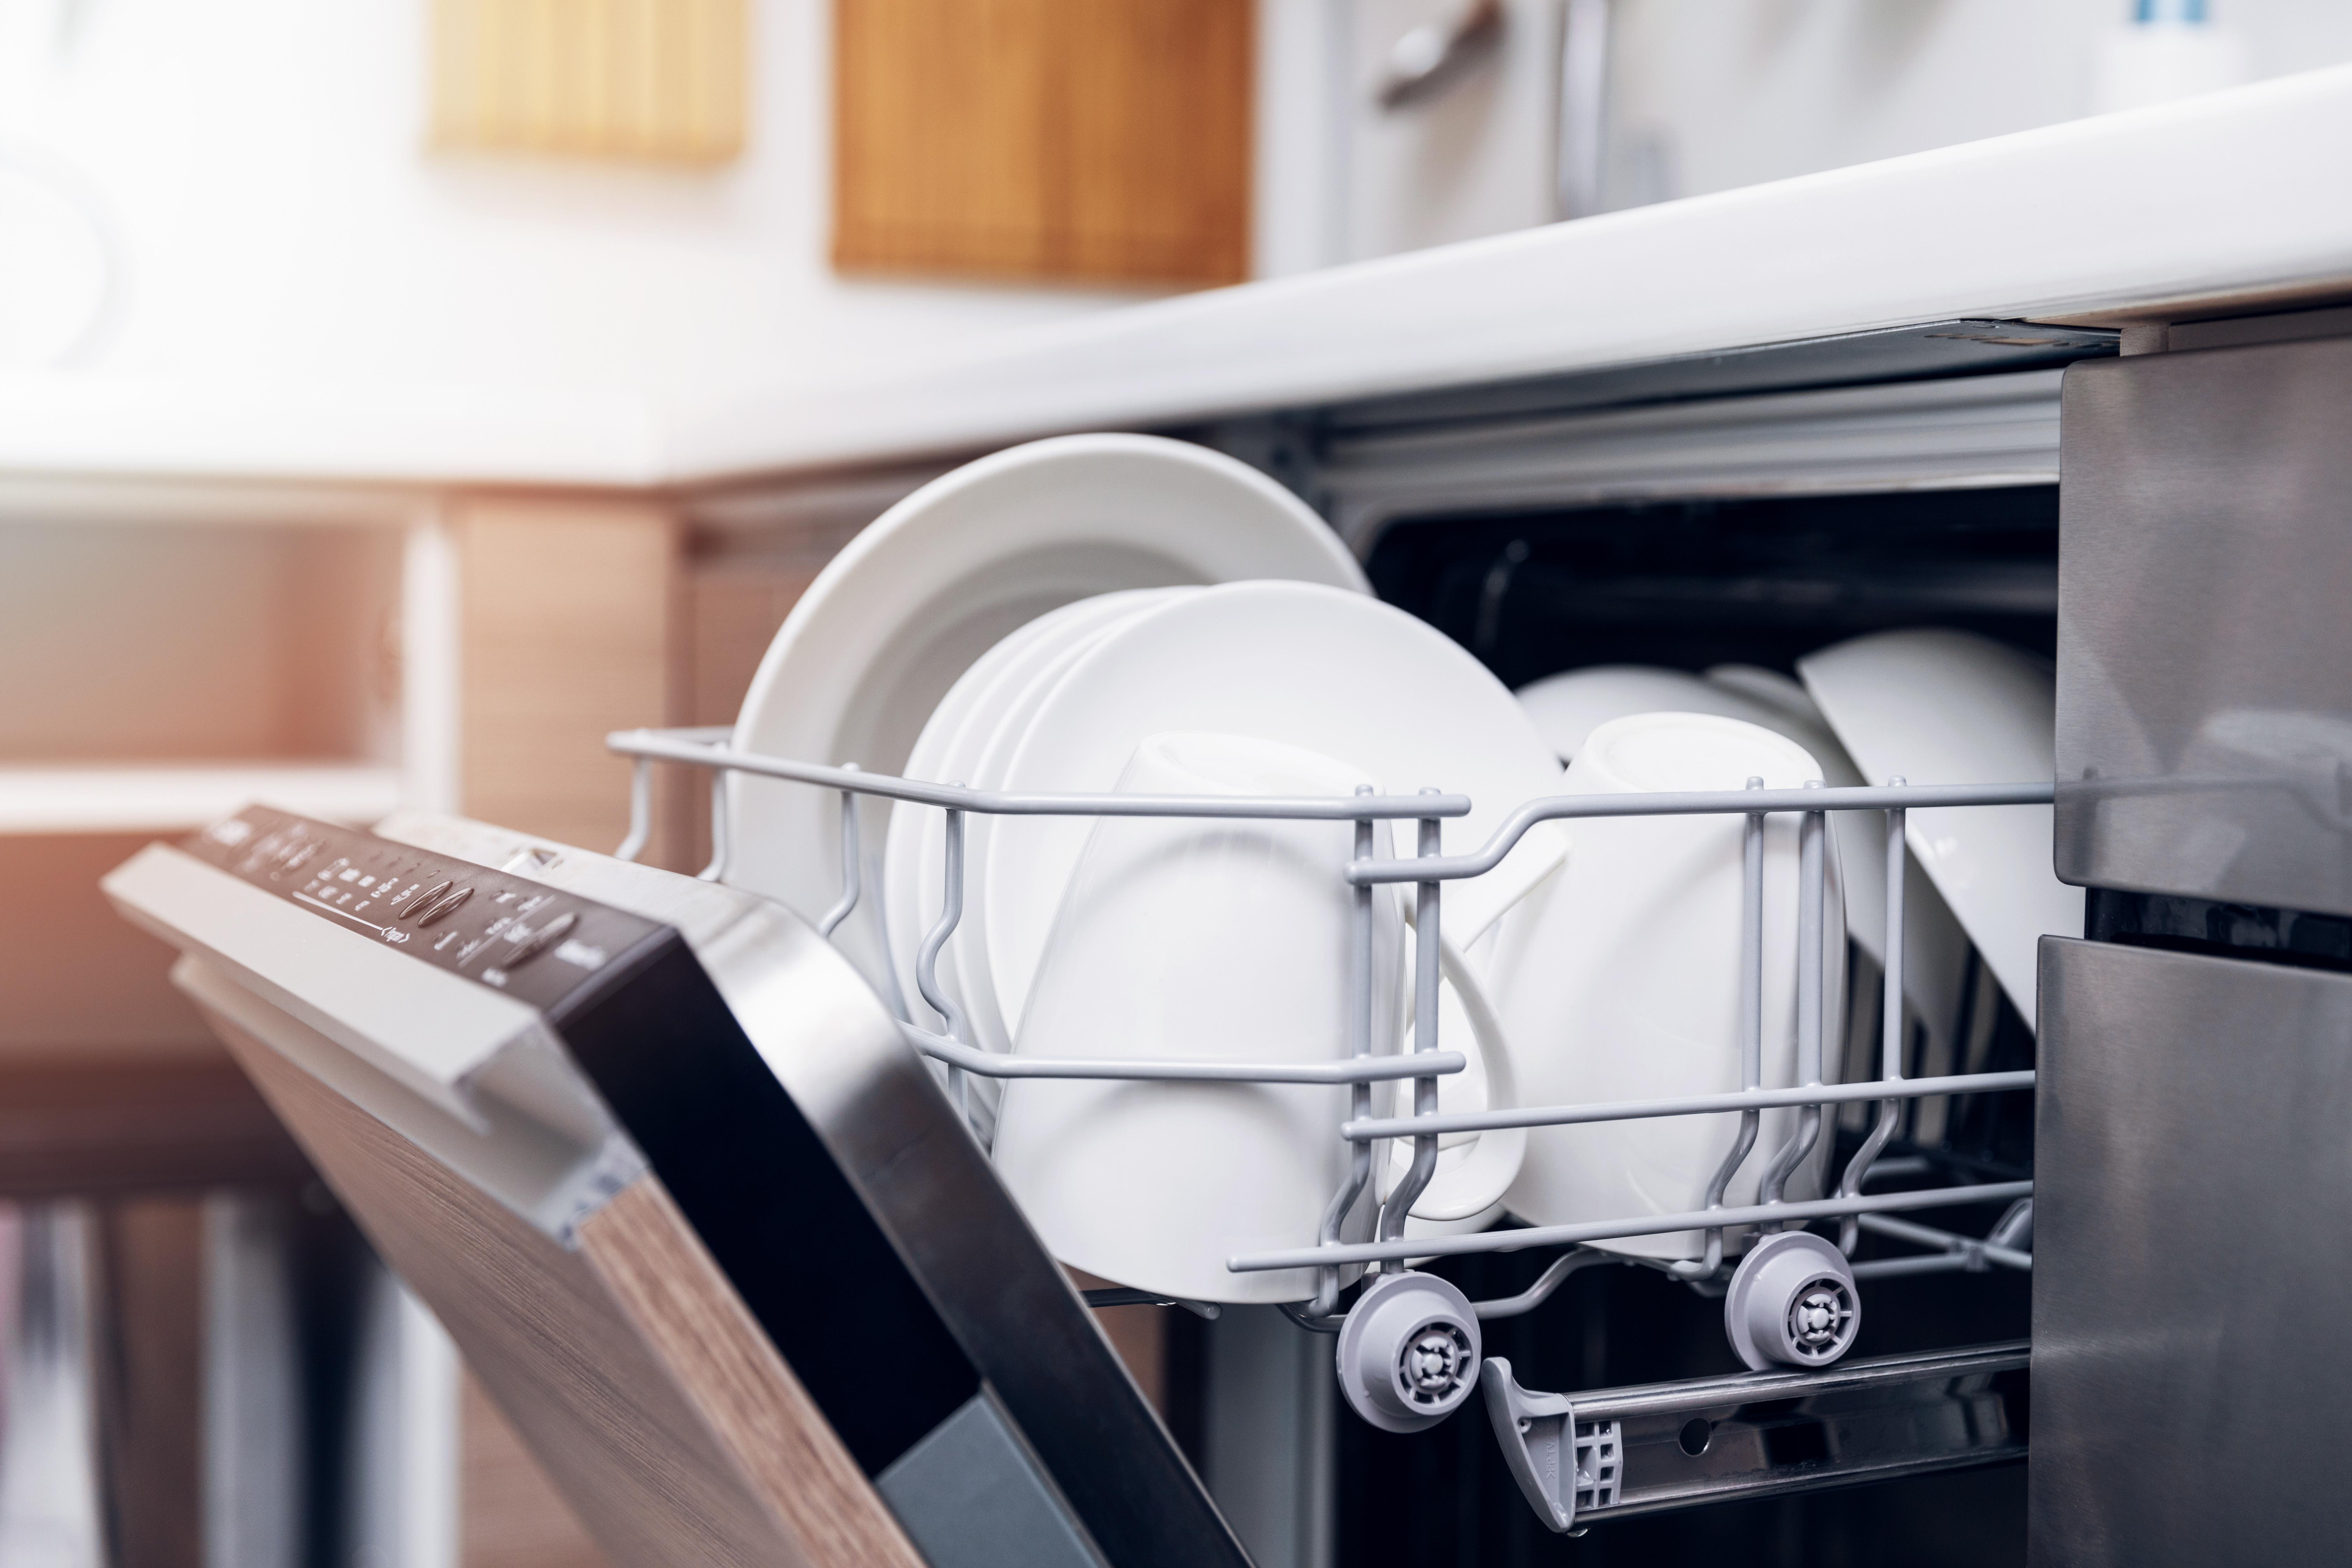 Dishwasher salt: what is it and what does it do?